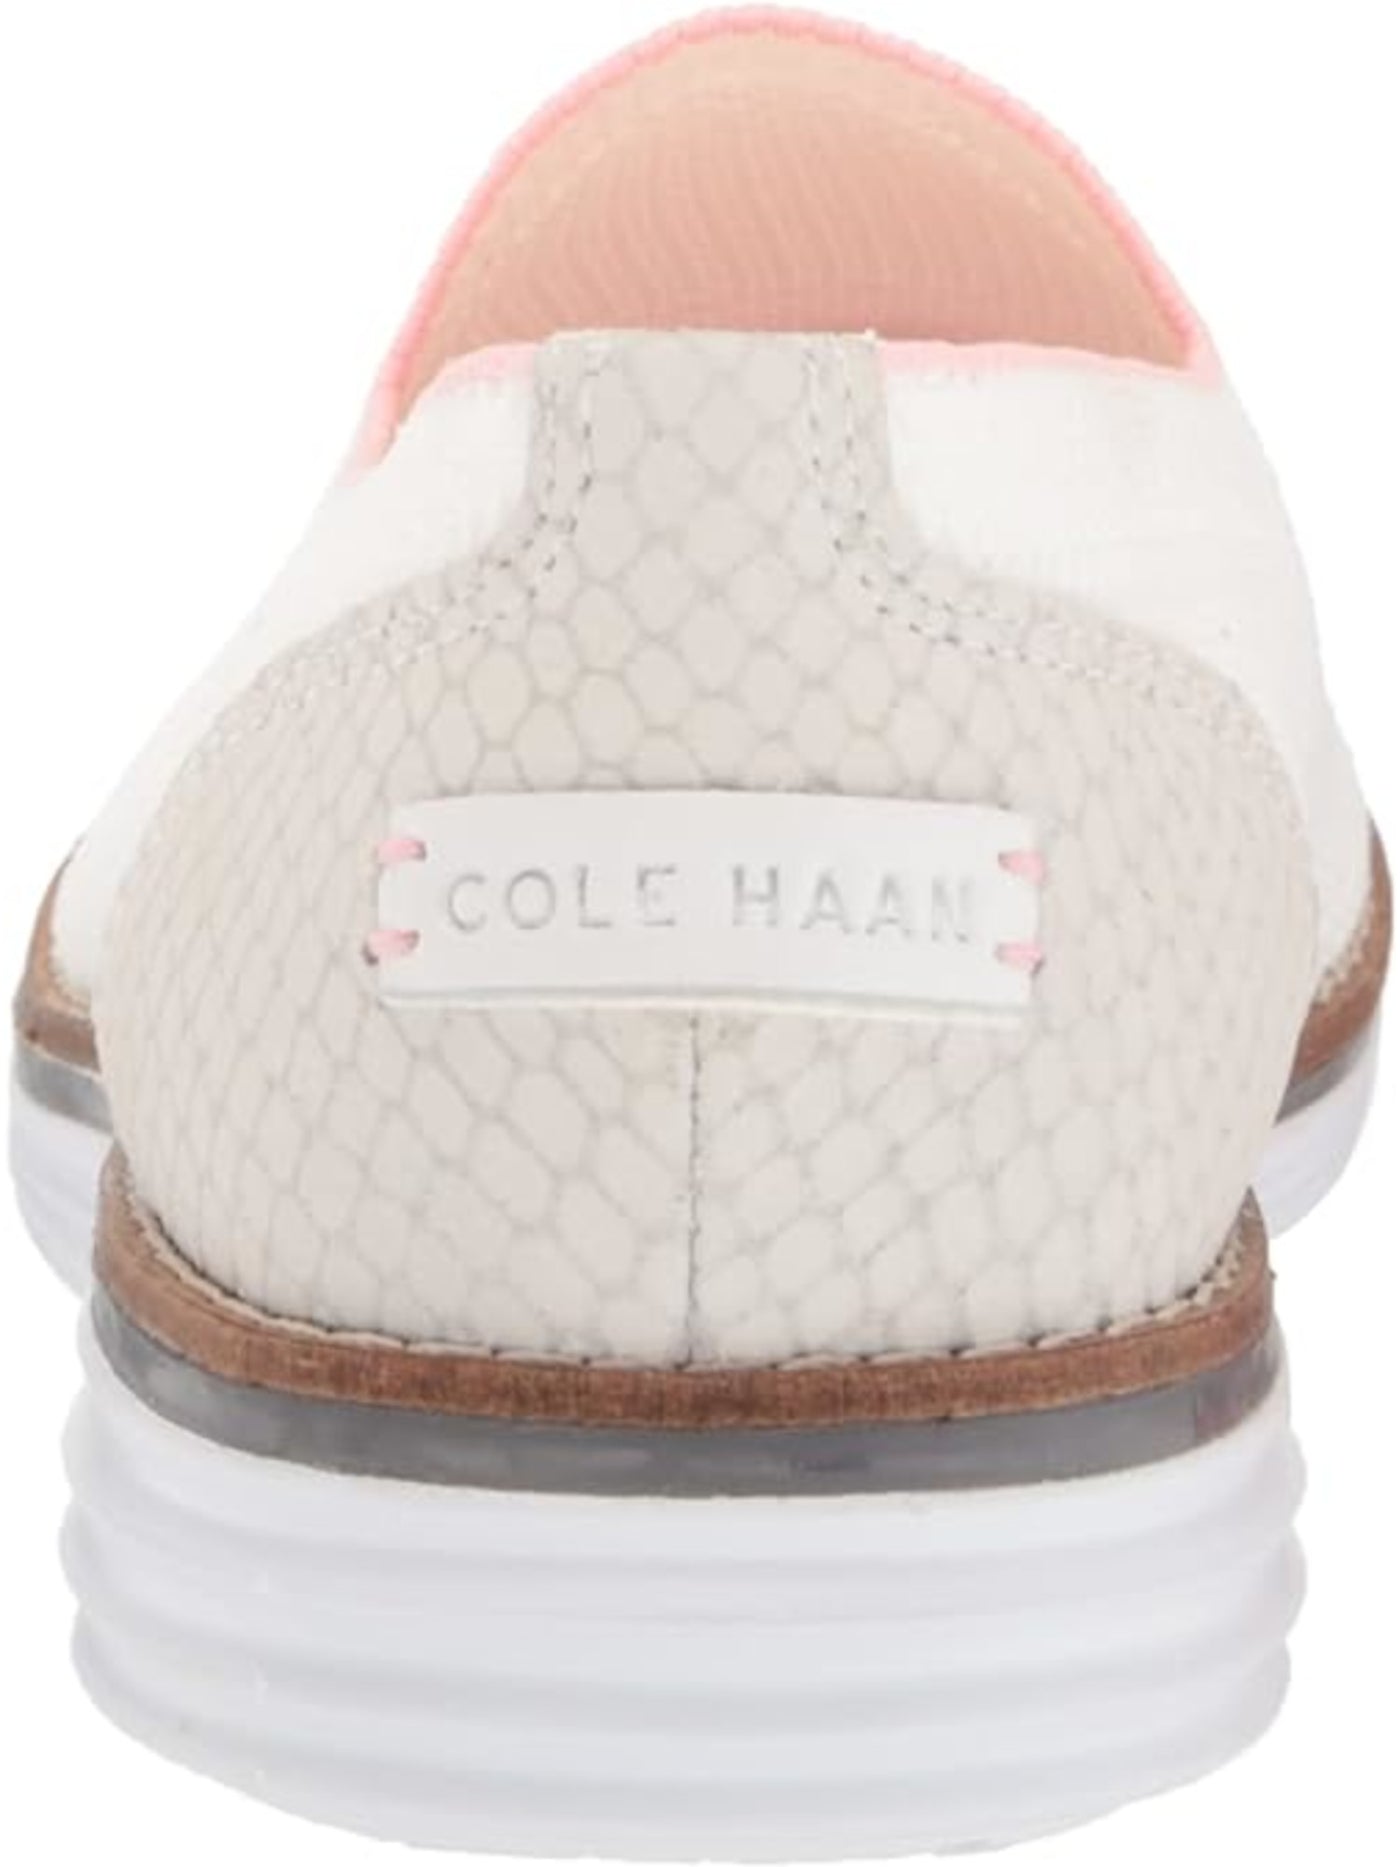 COLE HAAN Womens White Mixed Knit Traction Flexible Moisture Controll Comfort Cushioned Cloudfeel Meridan Almond Toe Wedge Slip On Loafers Shoes 7.5 B